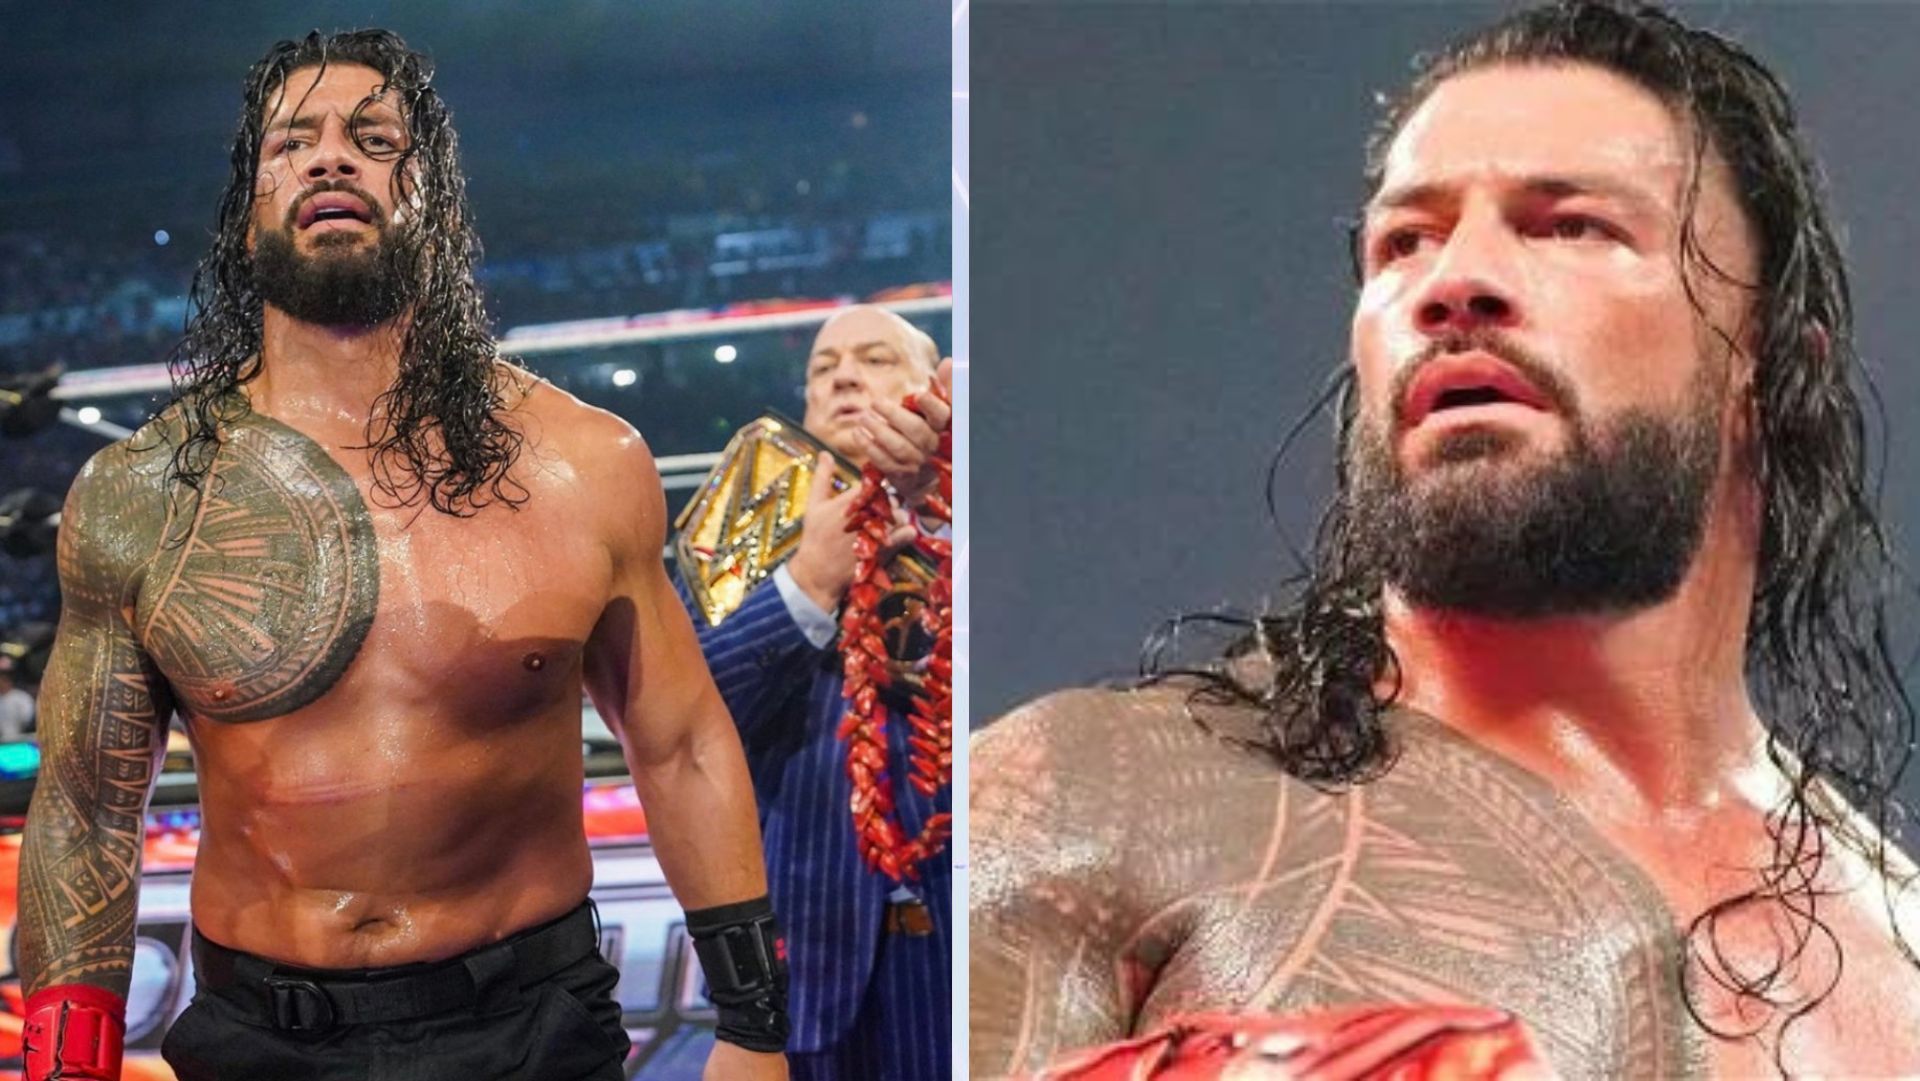 Roman Reigns is not scheduled for Payback 2023.